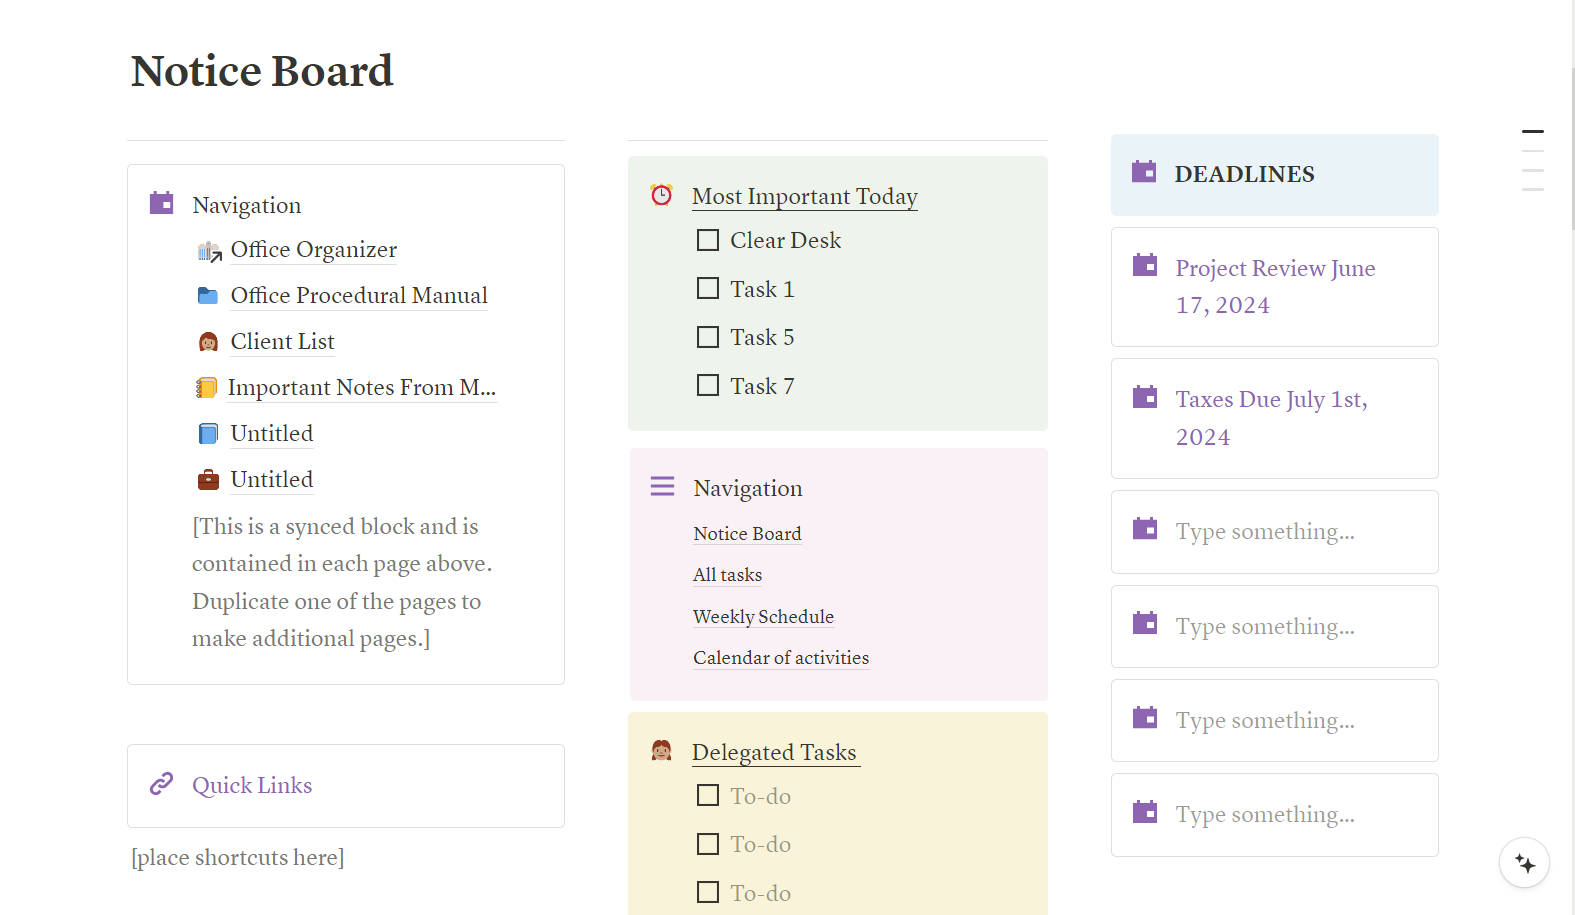 This template will help you to keep track of your most important tasks at a glance. You can also keep track of all your other tasks and schedule them into the future using the calendar database.